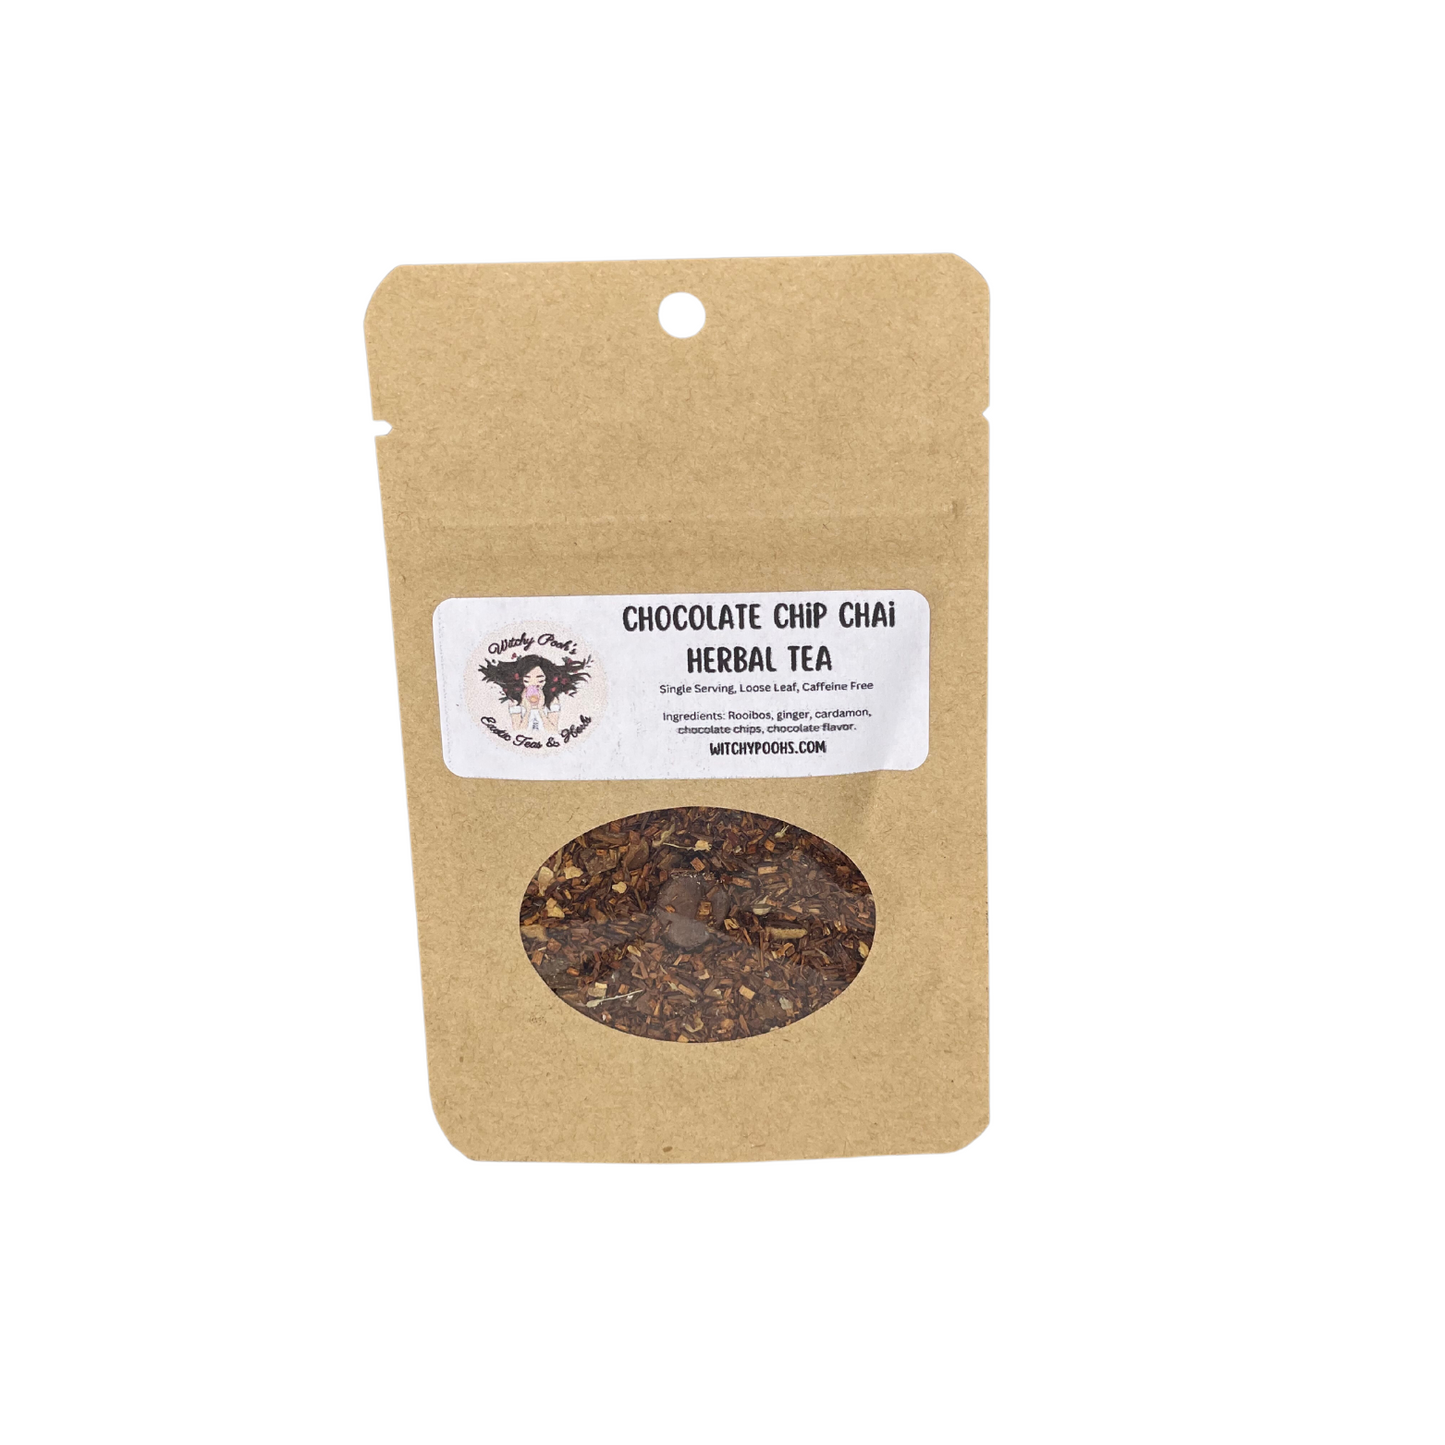 Witchy Pooh's Chocolate Chip Chai Loose Leaf Rooibos Herbal Tea with Real Chocolate Chips!-9